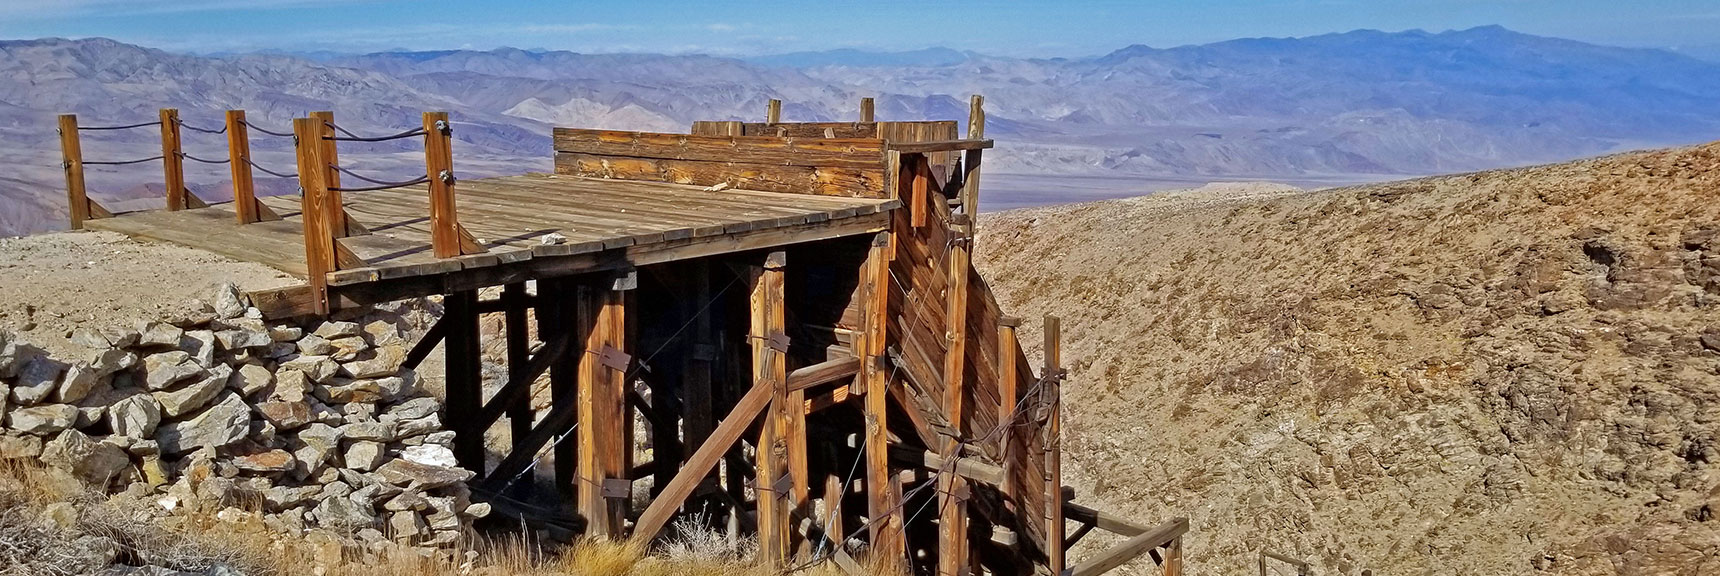 Upper Platform of Skidoo Stamp Mill | Skidoo Stamp Mill, Panamint Mountains, Death Valley National Park, CA